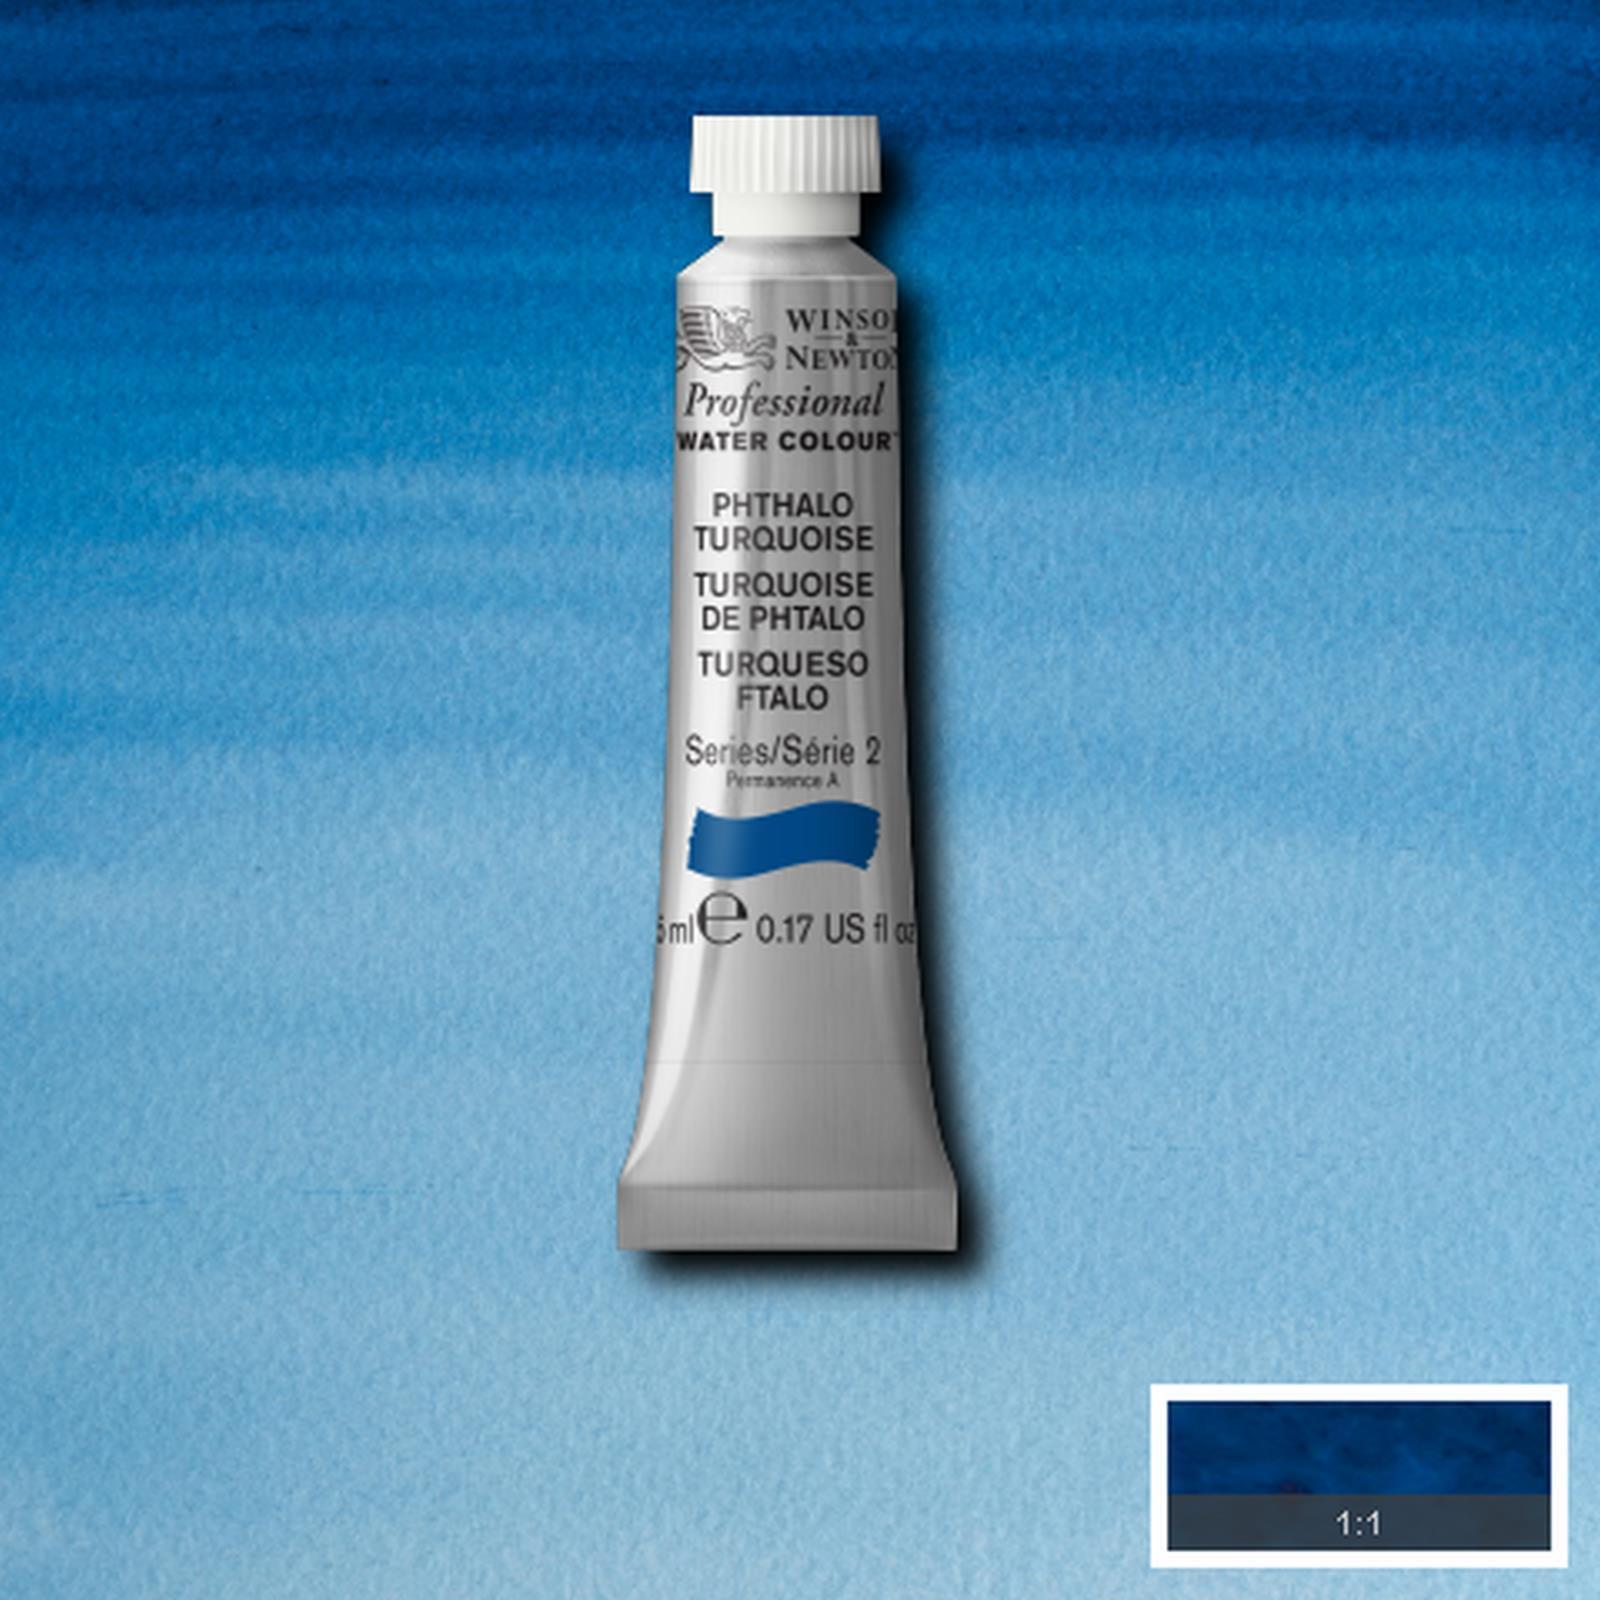 Professional Watercolour - Phthalo Turquoise, 14ml